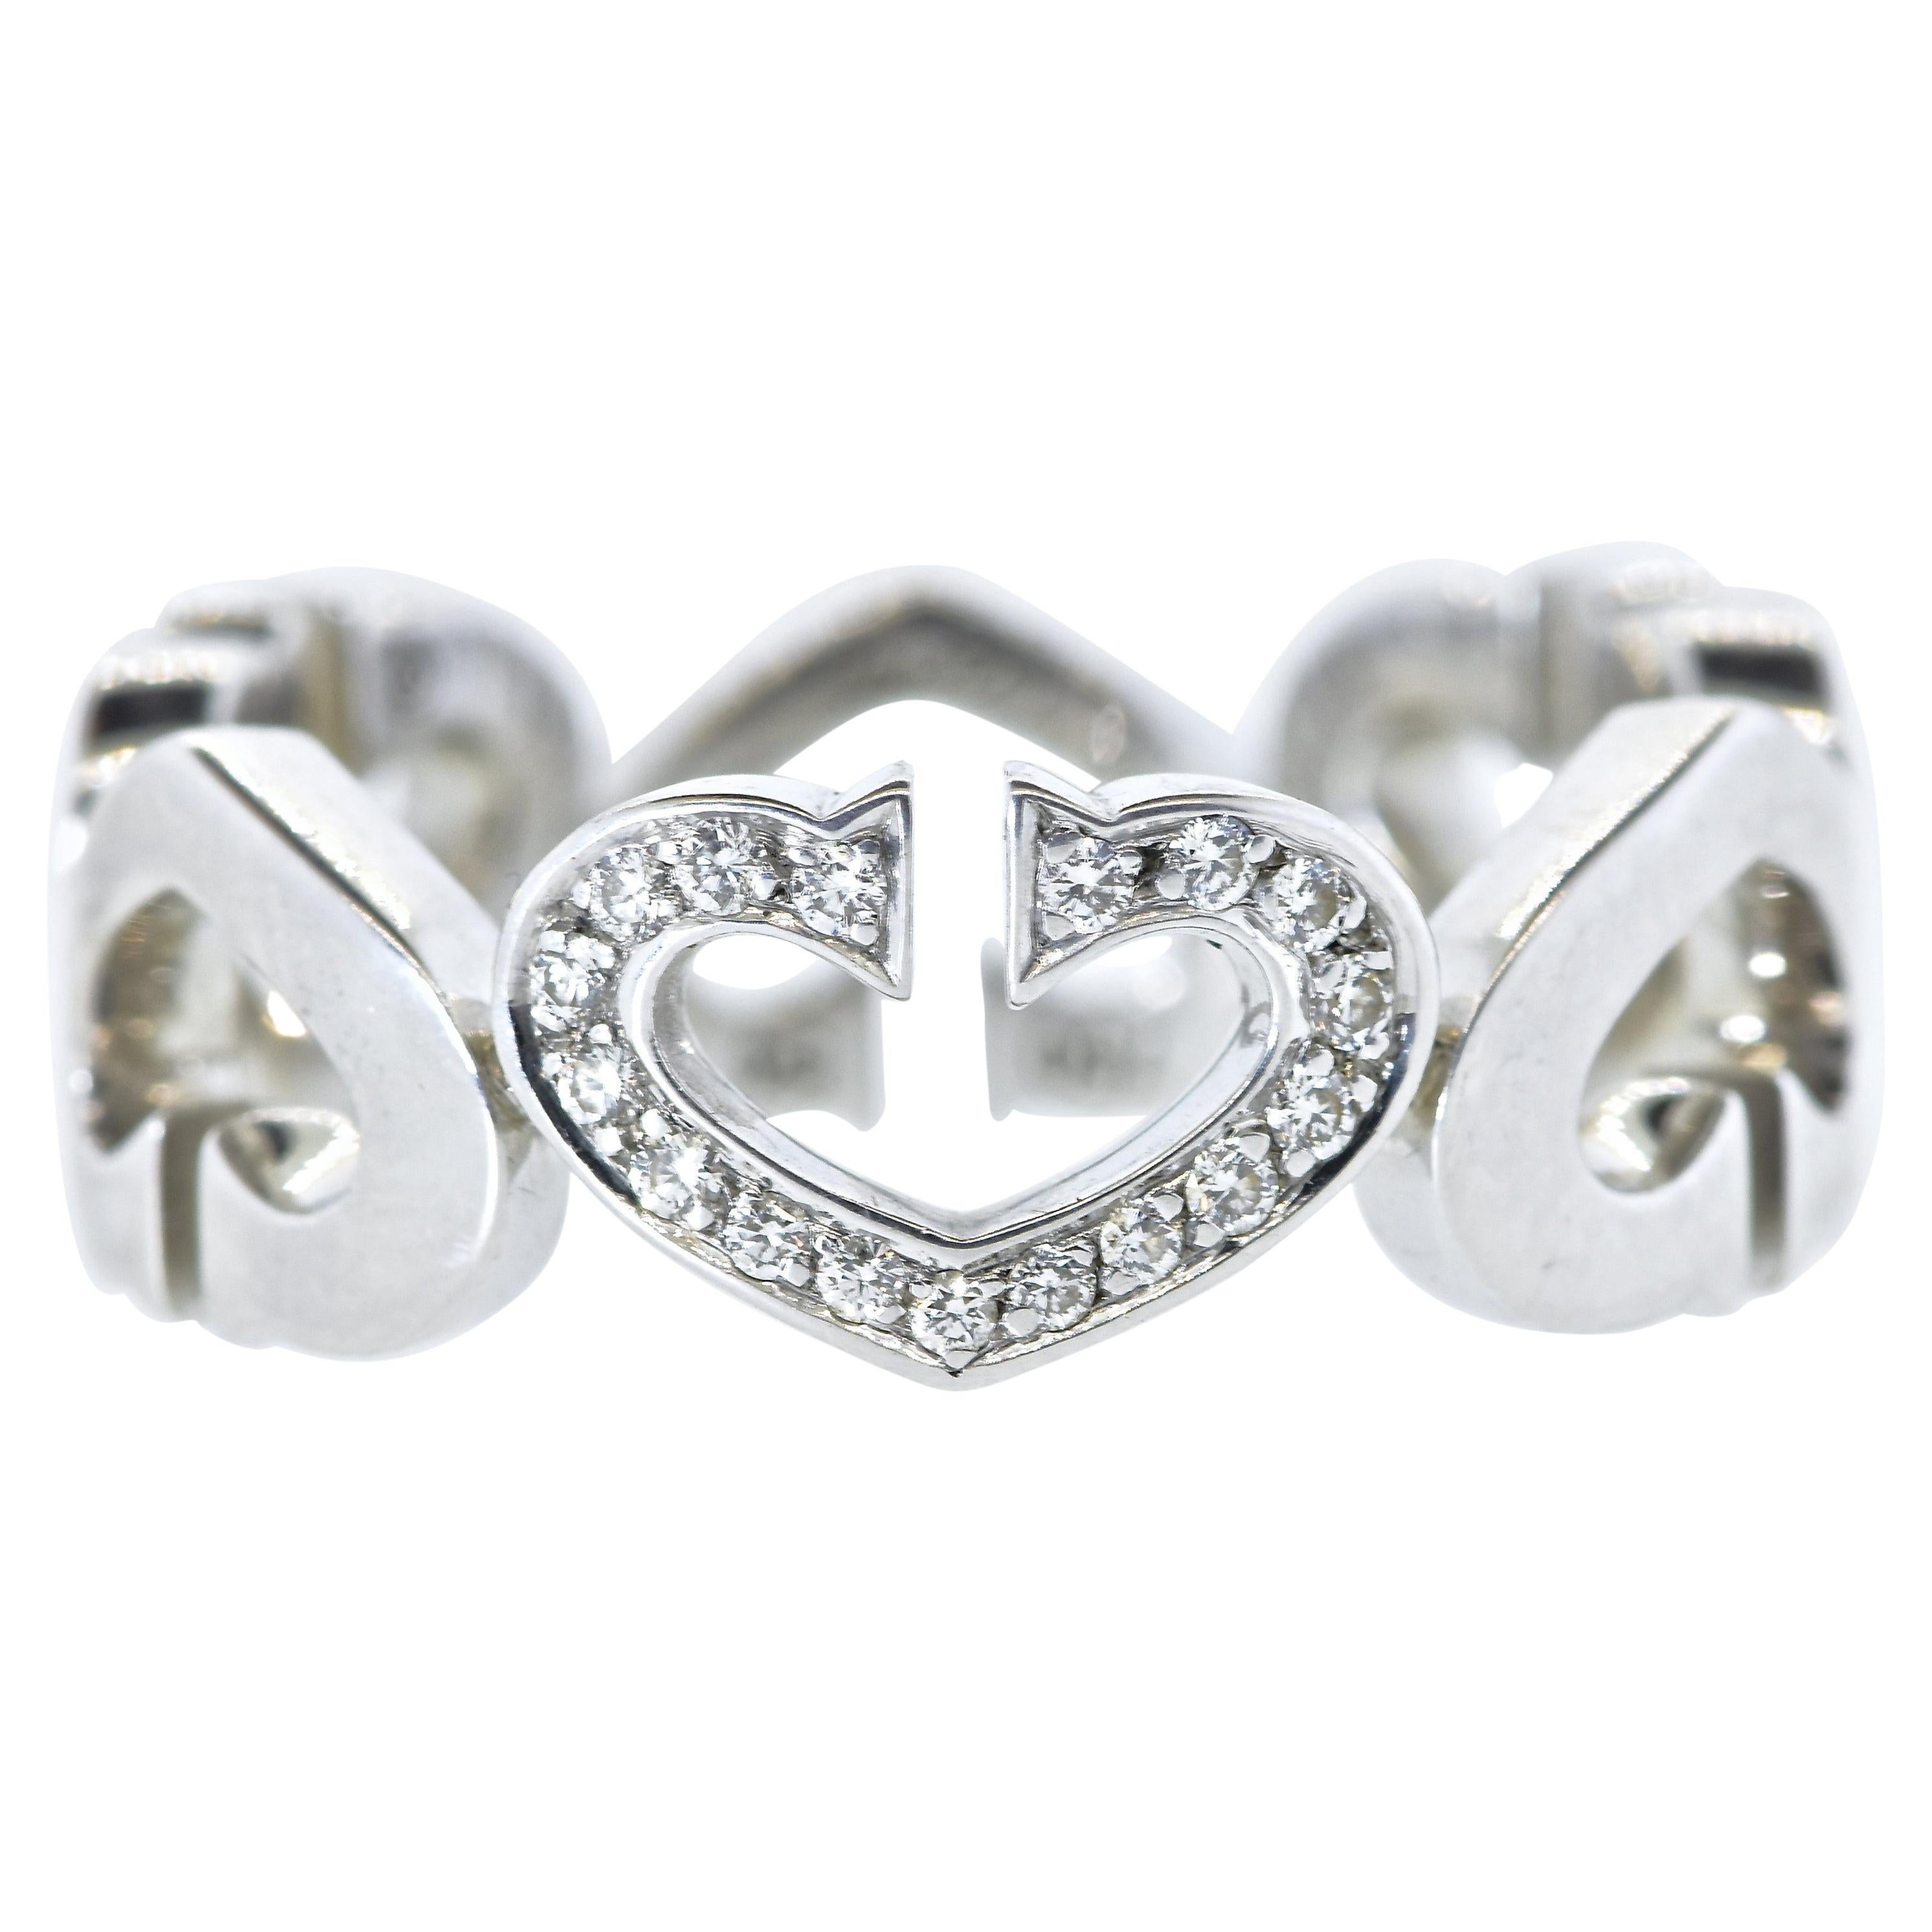 Cartier Heart Motif Diamond and 18K White Gold Ring